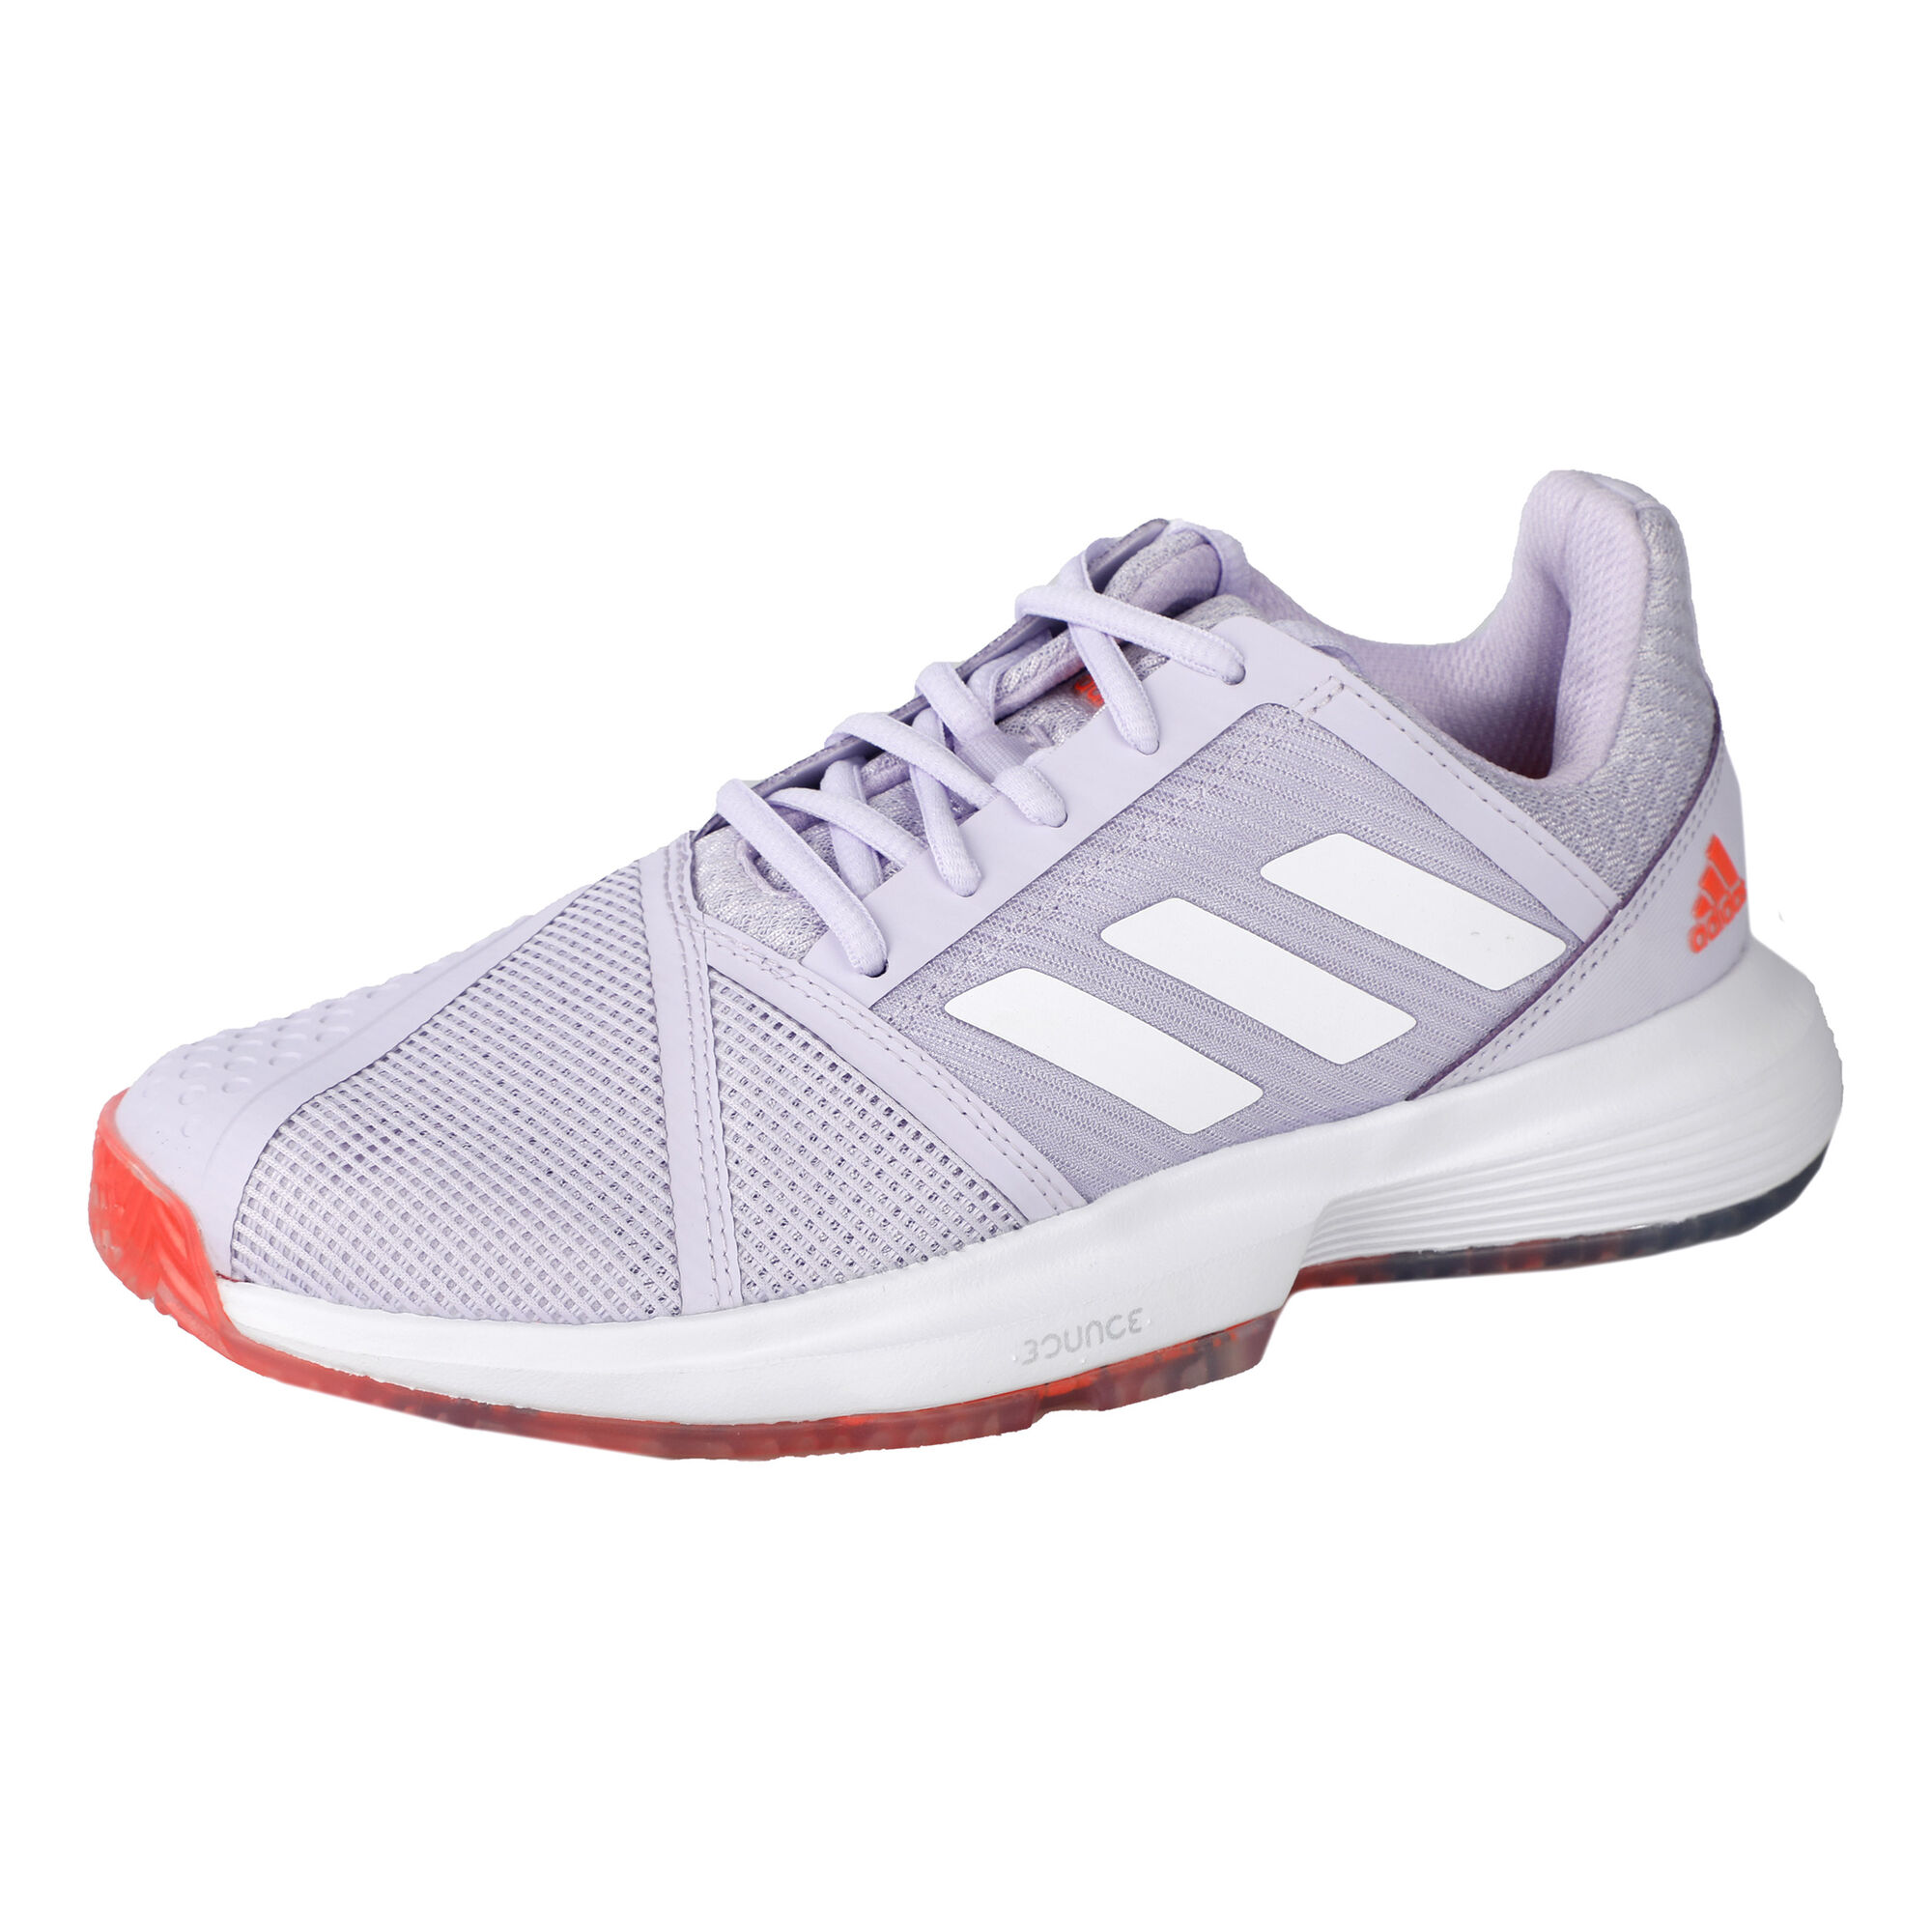 Buy adidas Court Jam Bounce All Court Shoe Women Lilac White online